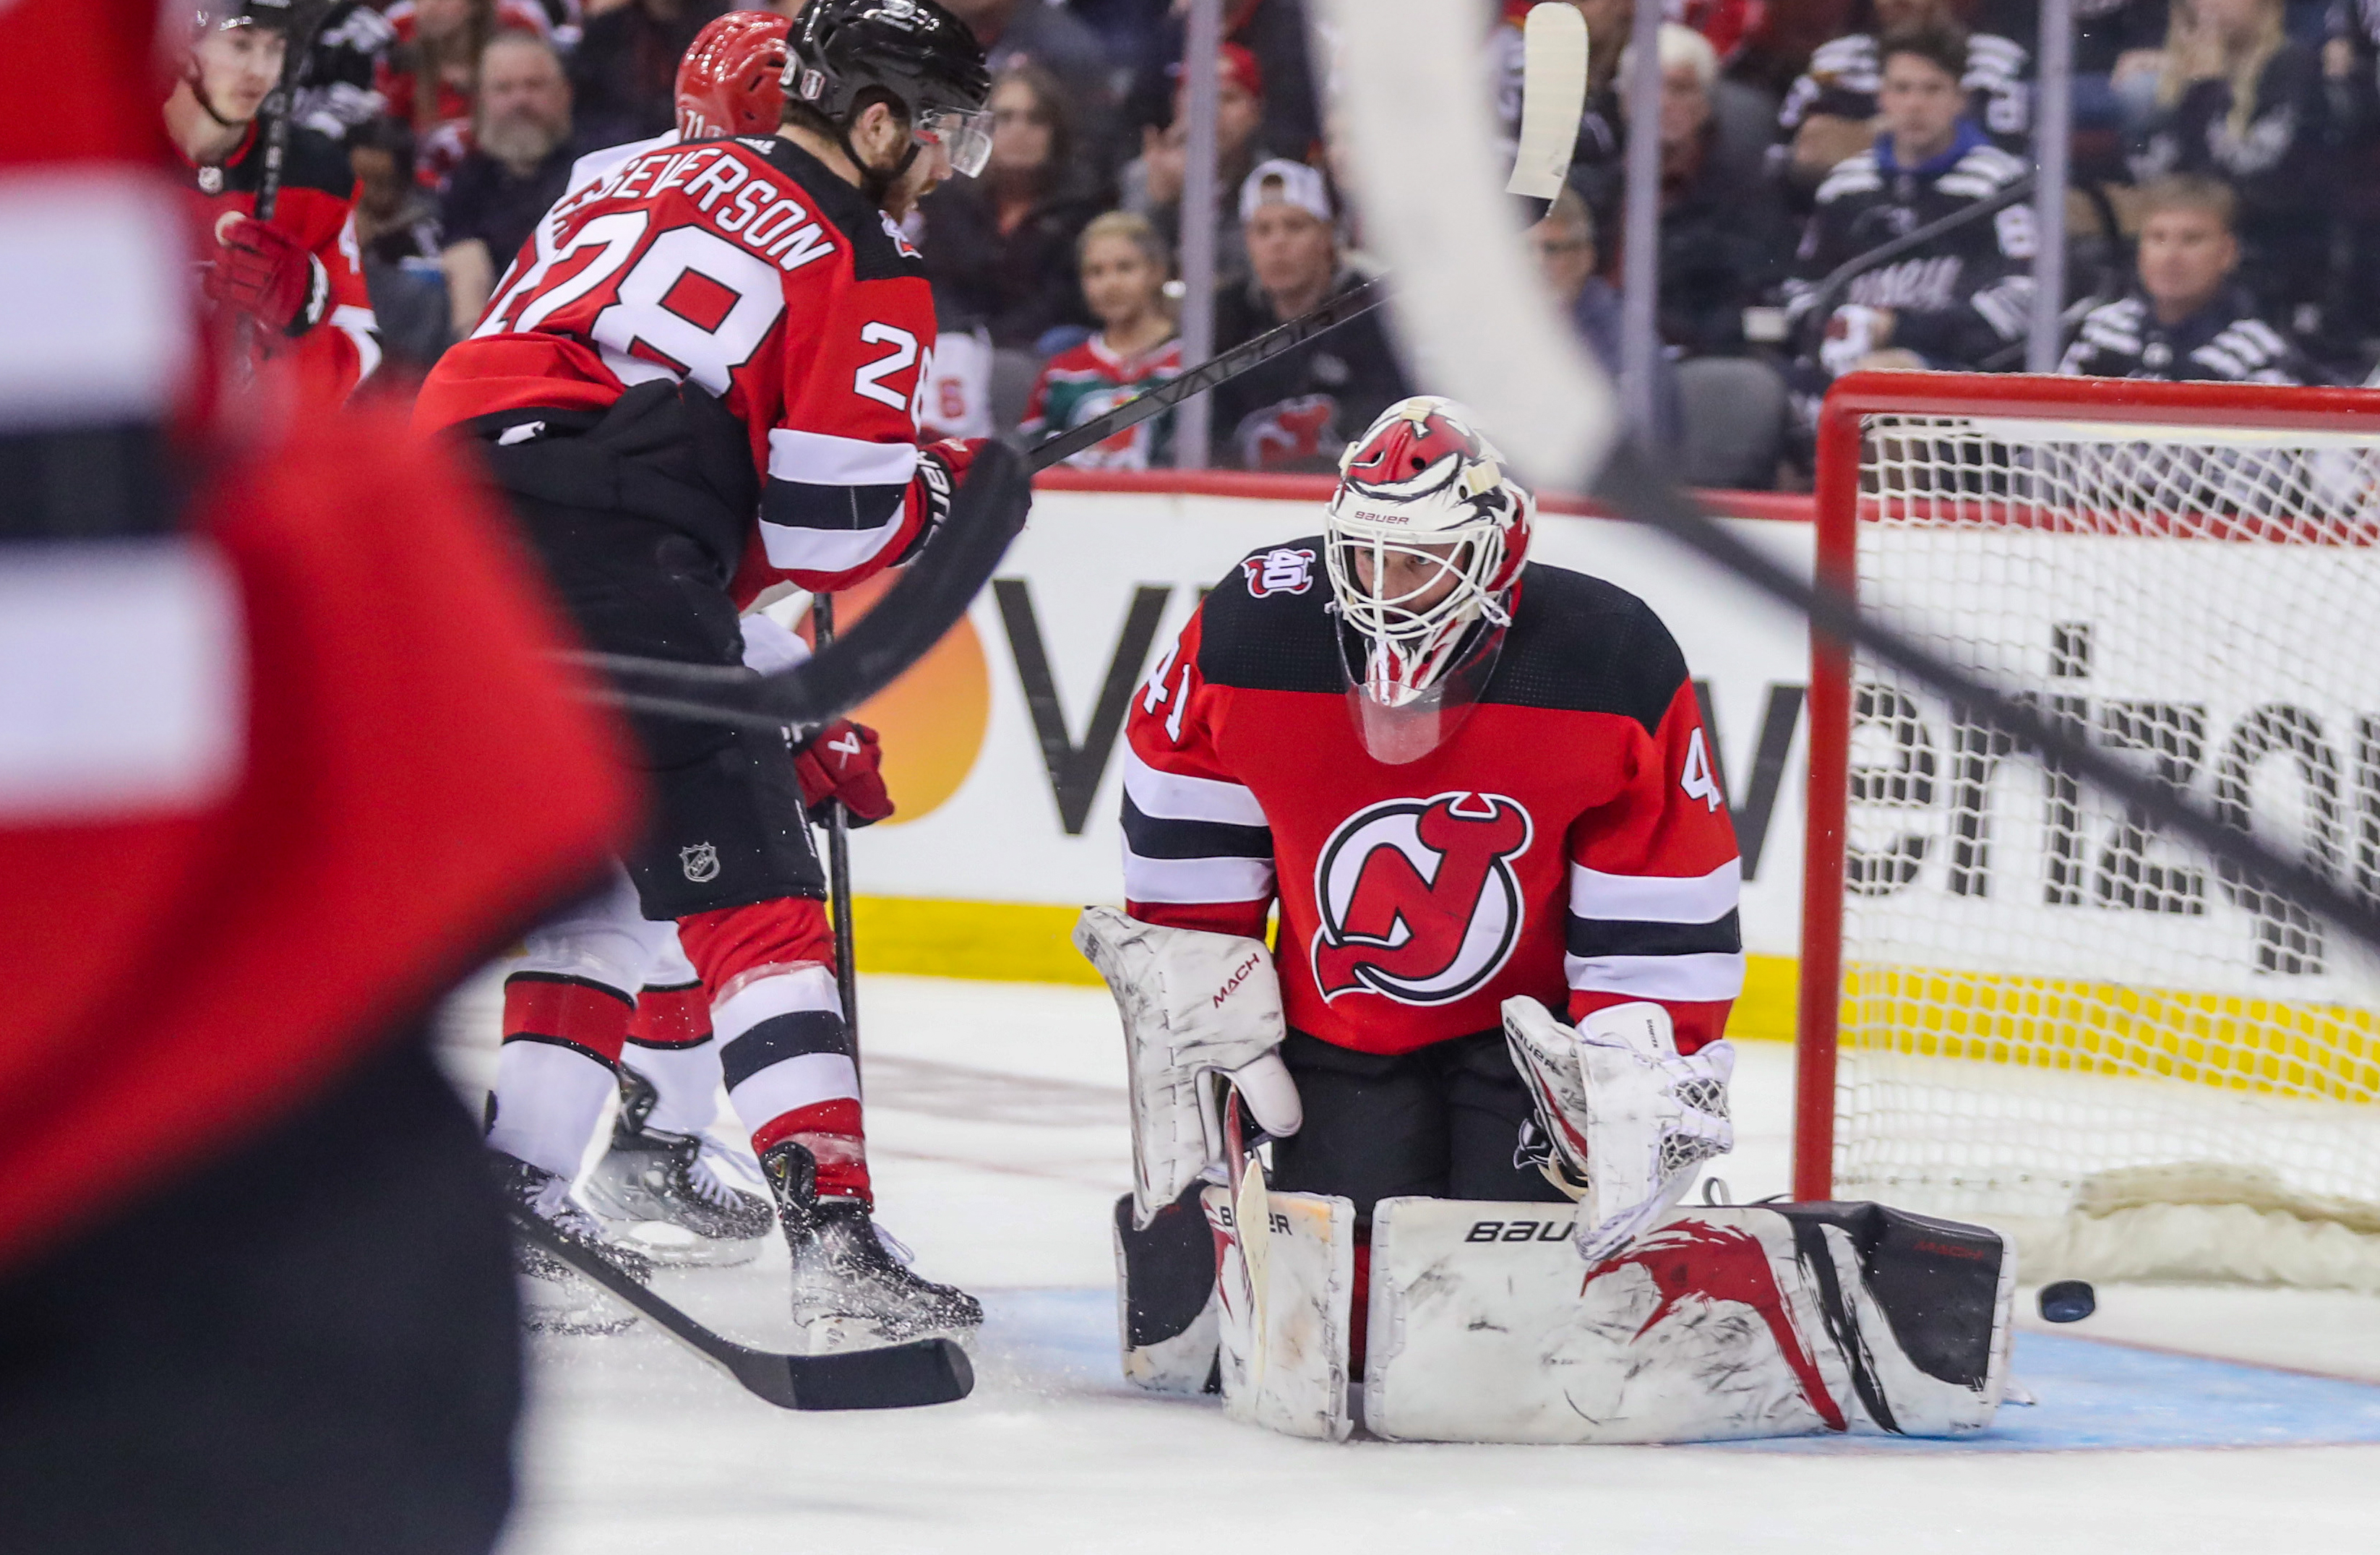 Hurricanes blowout loss to Devils familiar. Can they rebound